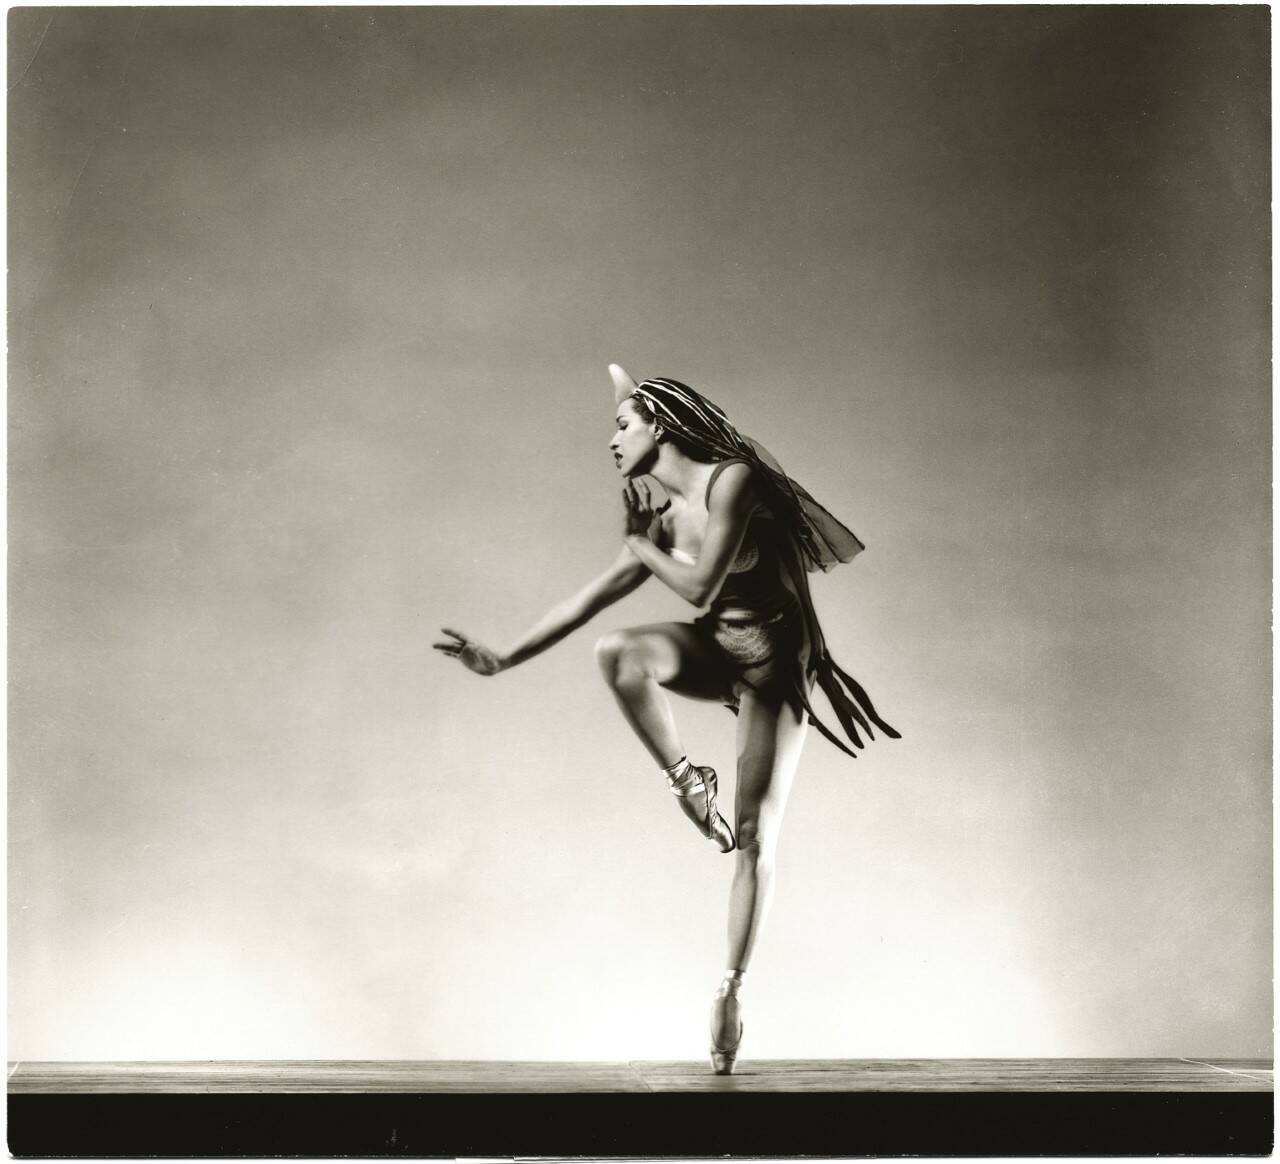 Photo by George Platt Lynes
Maria Tallchief’s stunning performance in the ballet Orpheus led to the founding of the NY City Ballet in 1948.